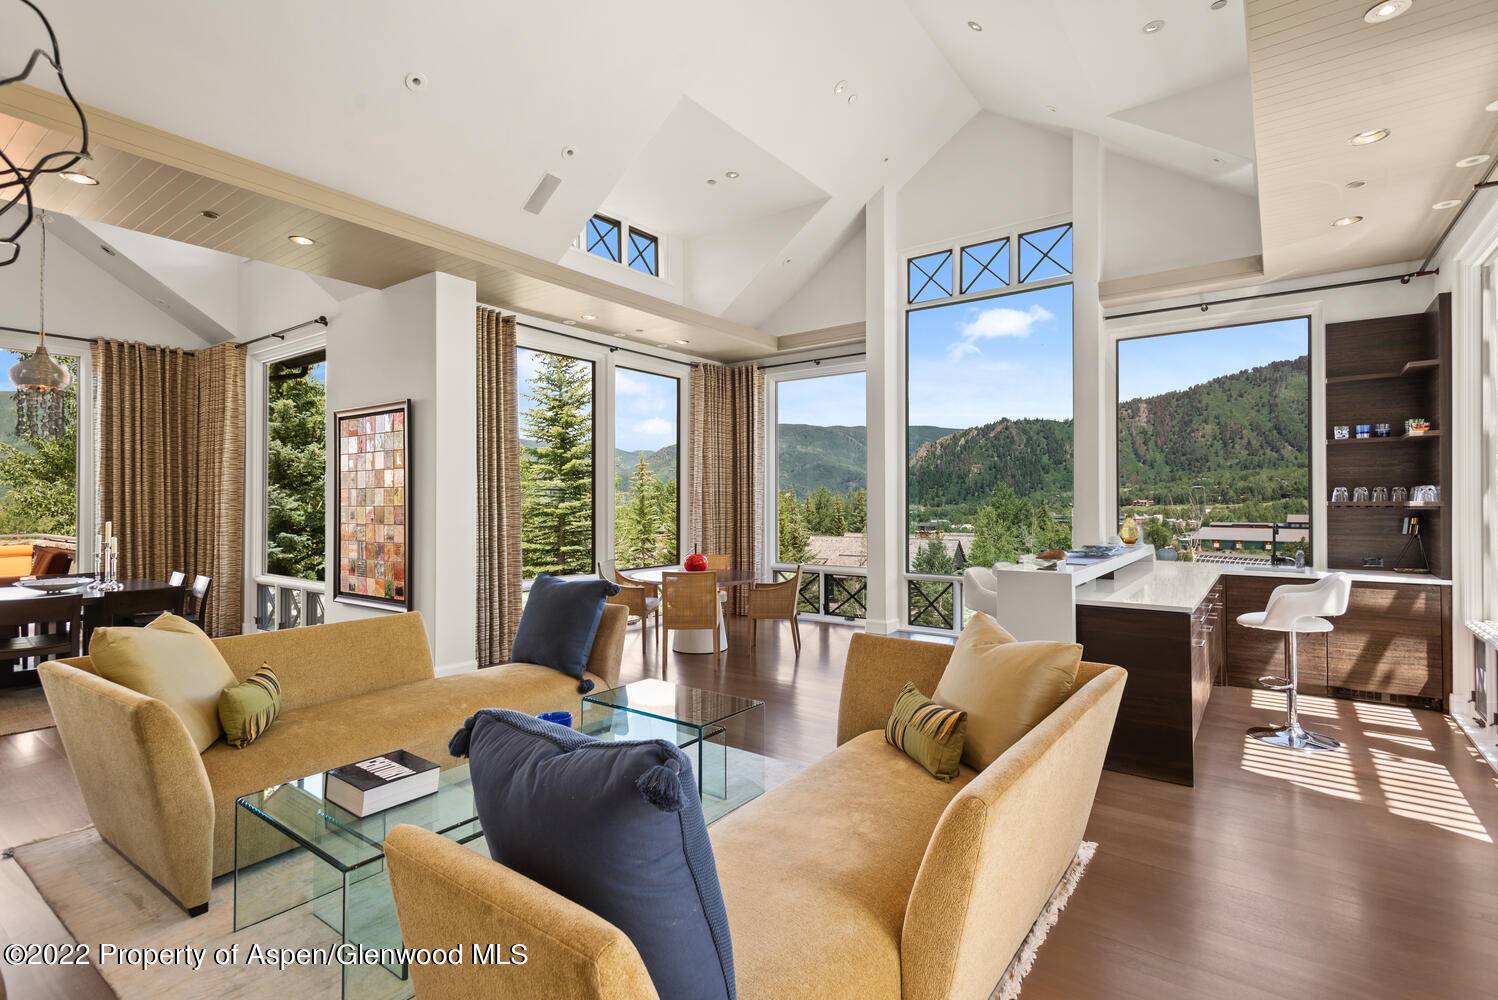 This stunning, contemporary five bedroom home boasts direct ski in, ski out access onto Tiehack at Buttermilk mountain from the slopeside patio with big views of Aspen Mountain, Aspen Highlands ...